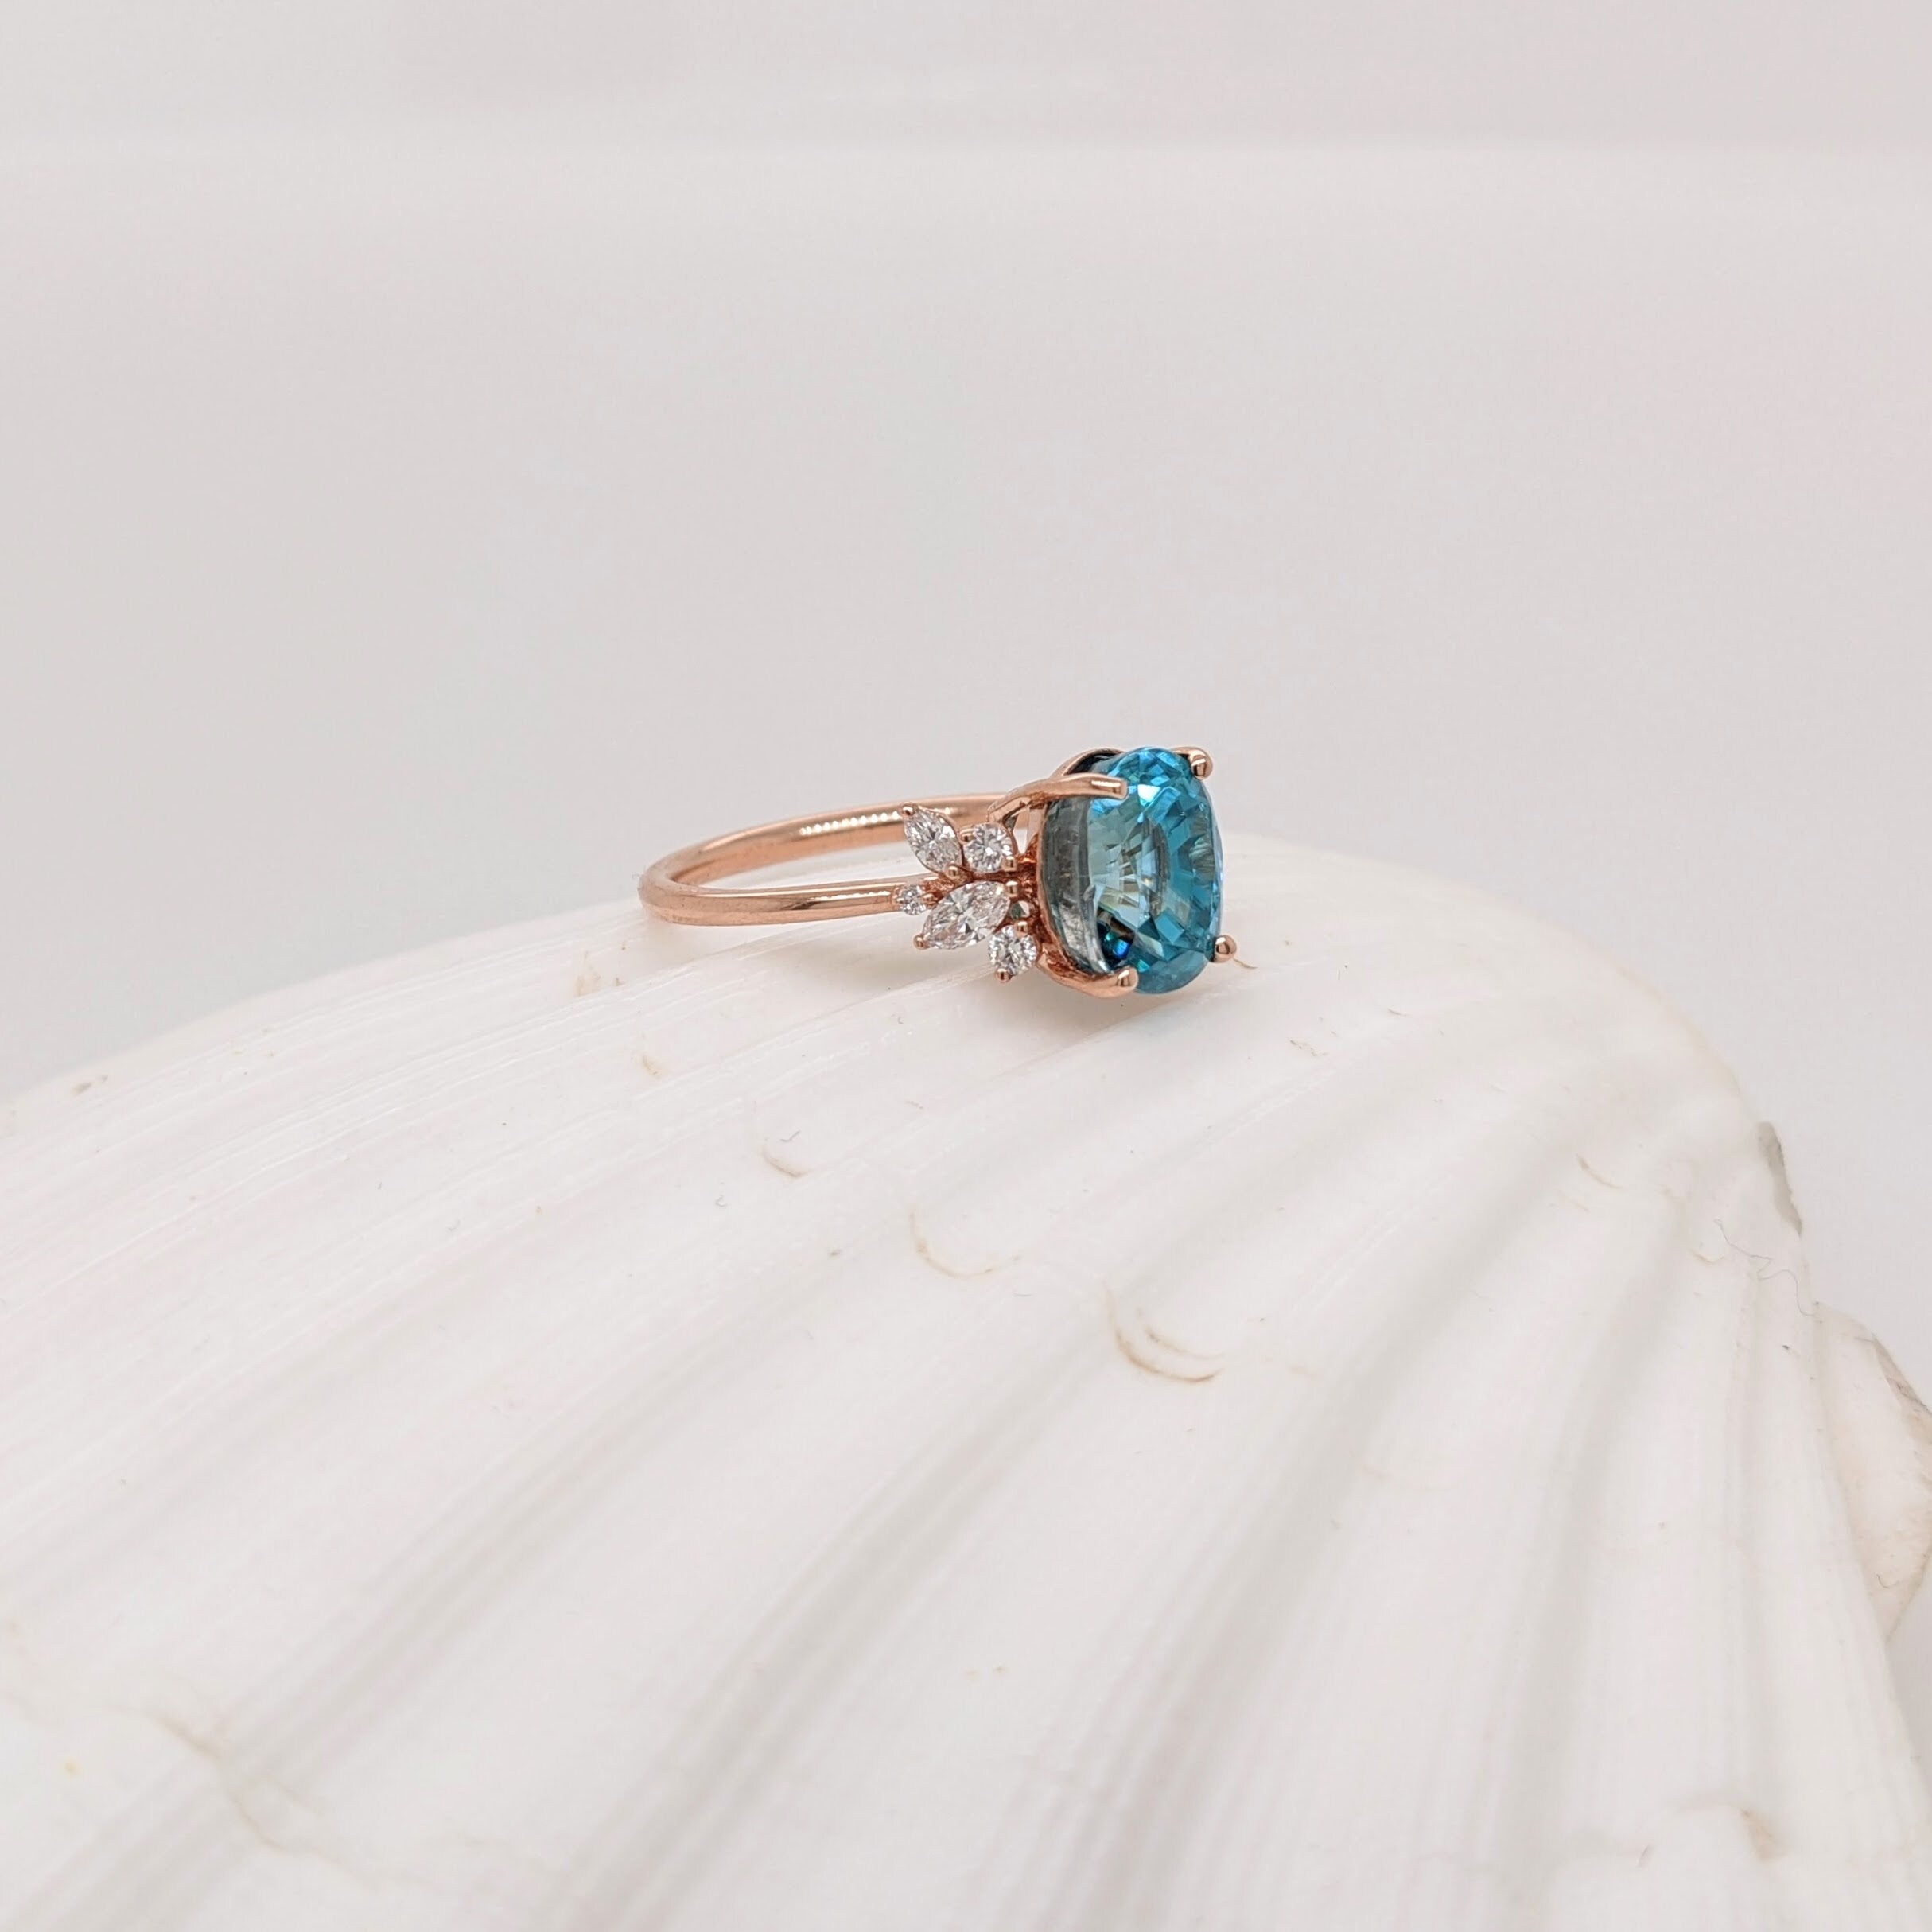 Beautiful Natural Blue Zircon Ring in 14K Gold w Natural Diamond Accent Halo | Oval 9x7mm | Nature Themed | December Birthstone |